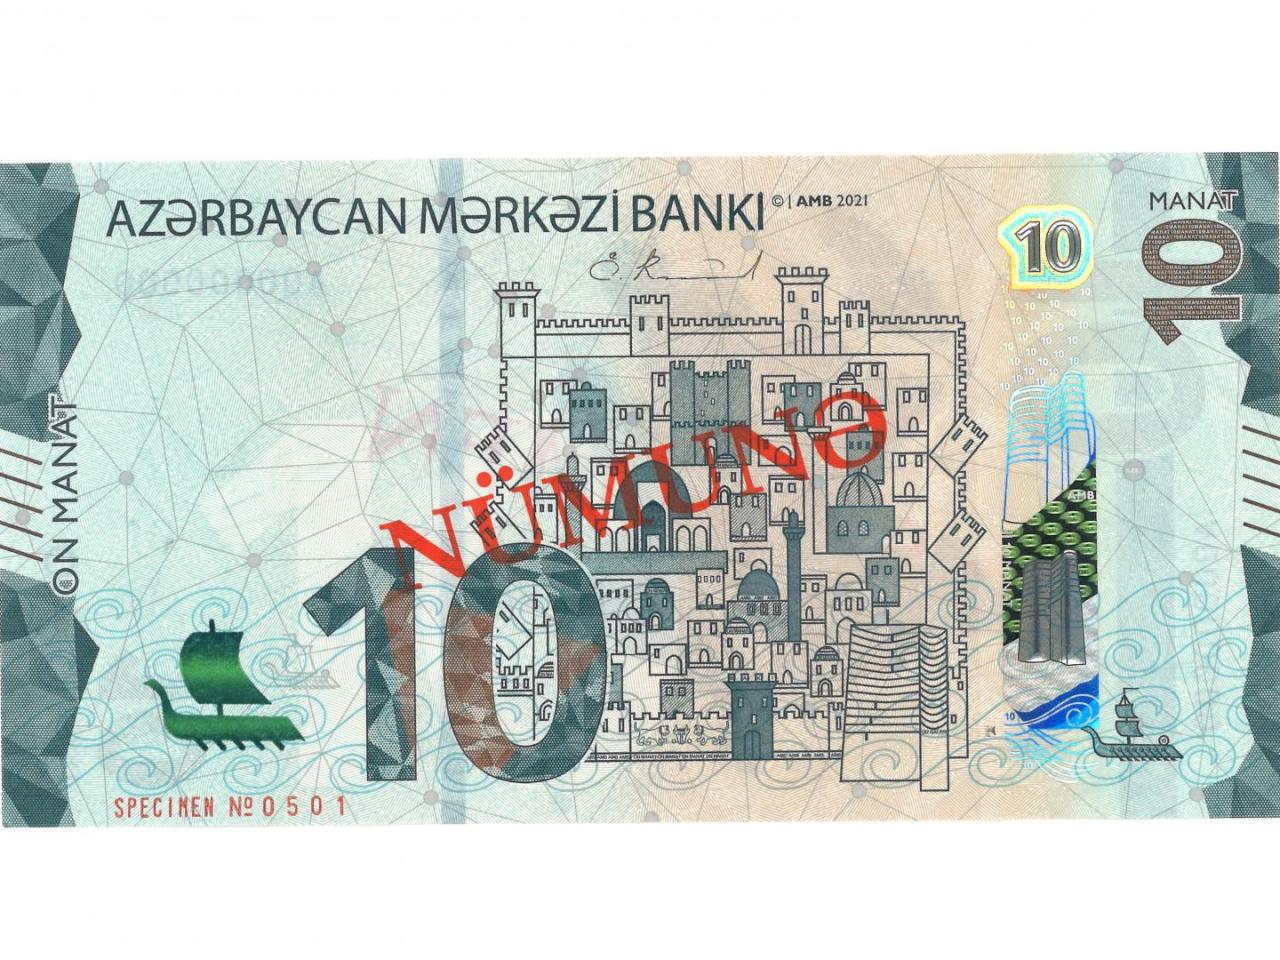 CBA  to produces banknote with new design [PHOTO]